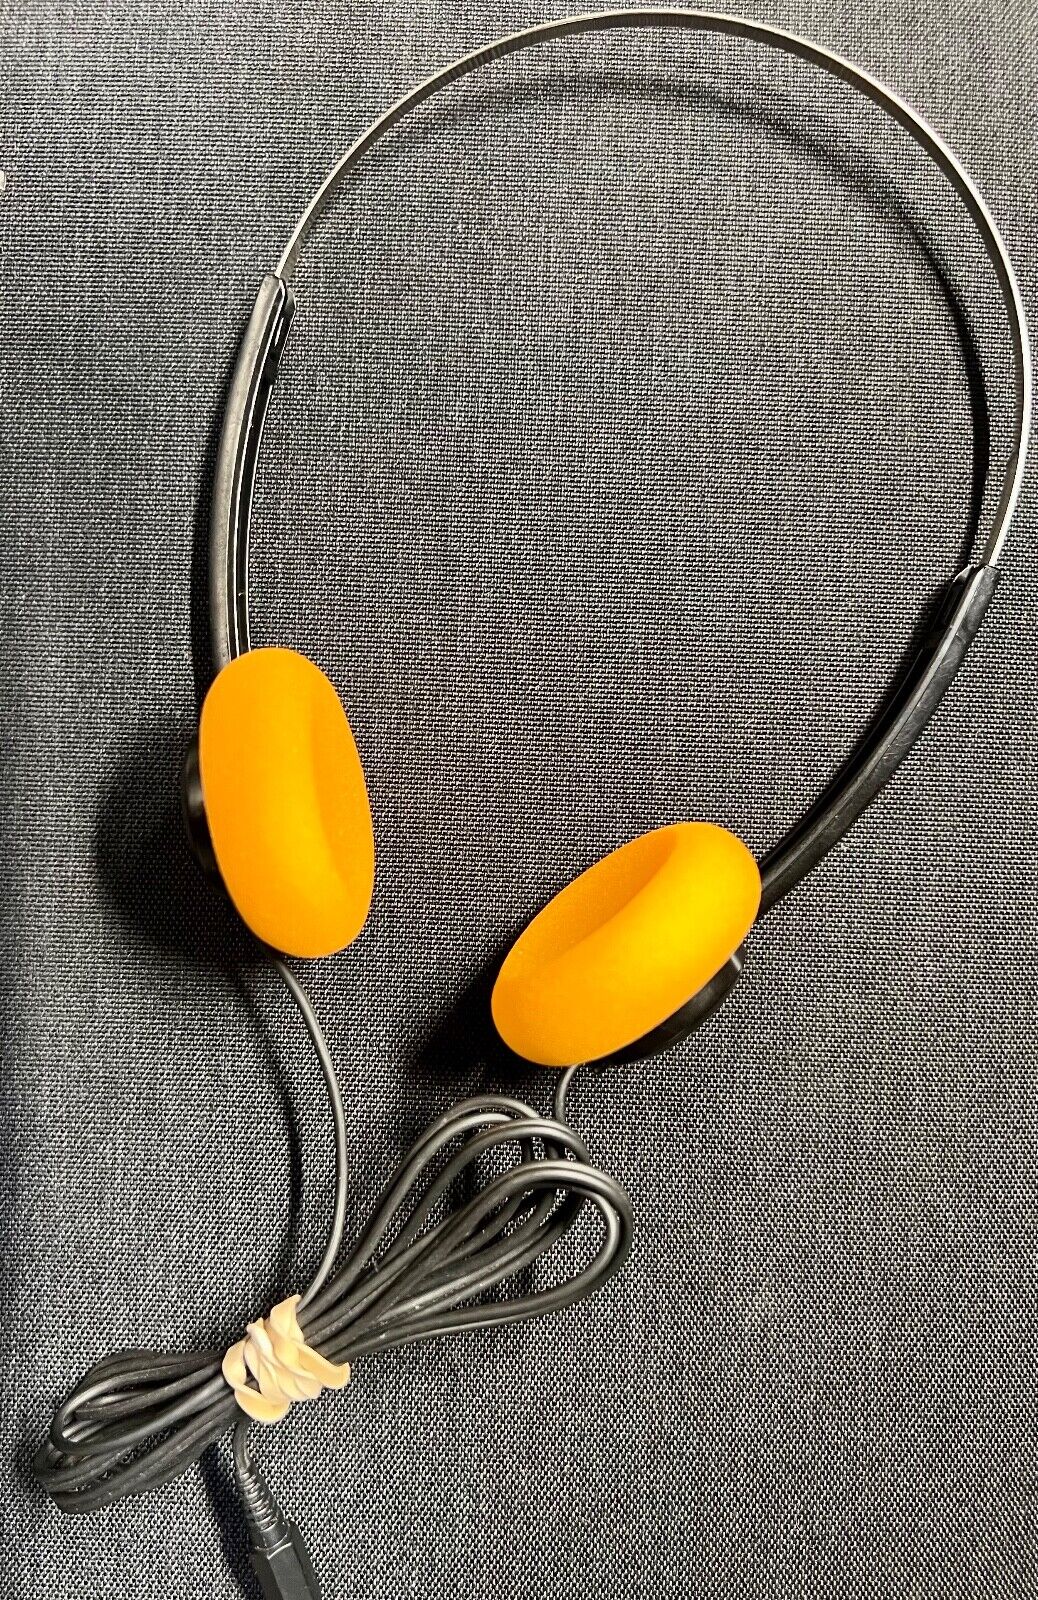 Sony MDR-10 headphones, with new orange ear pads